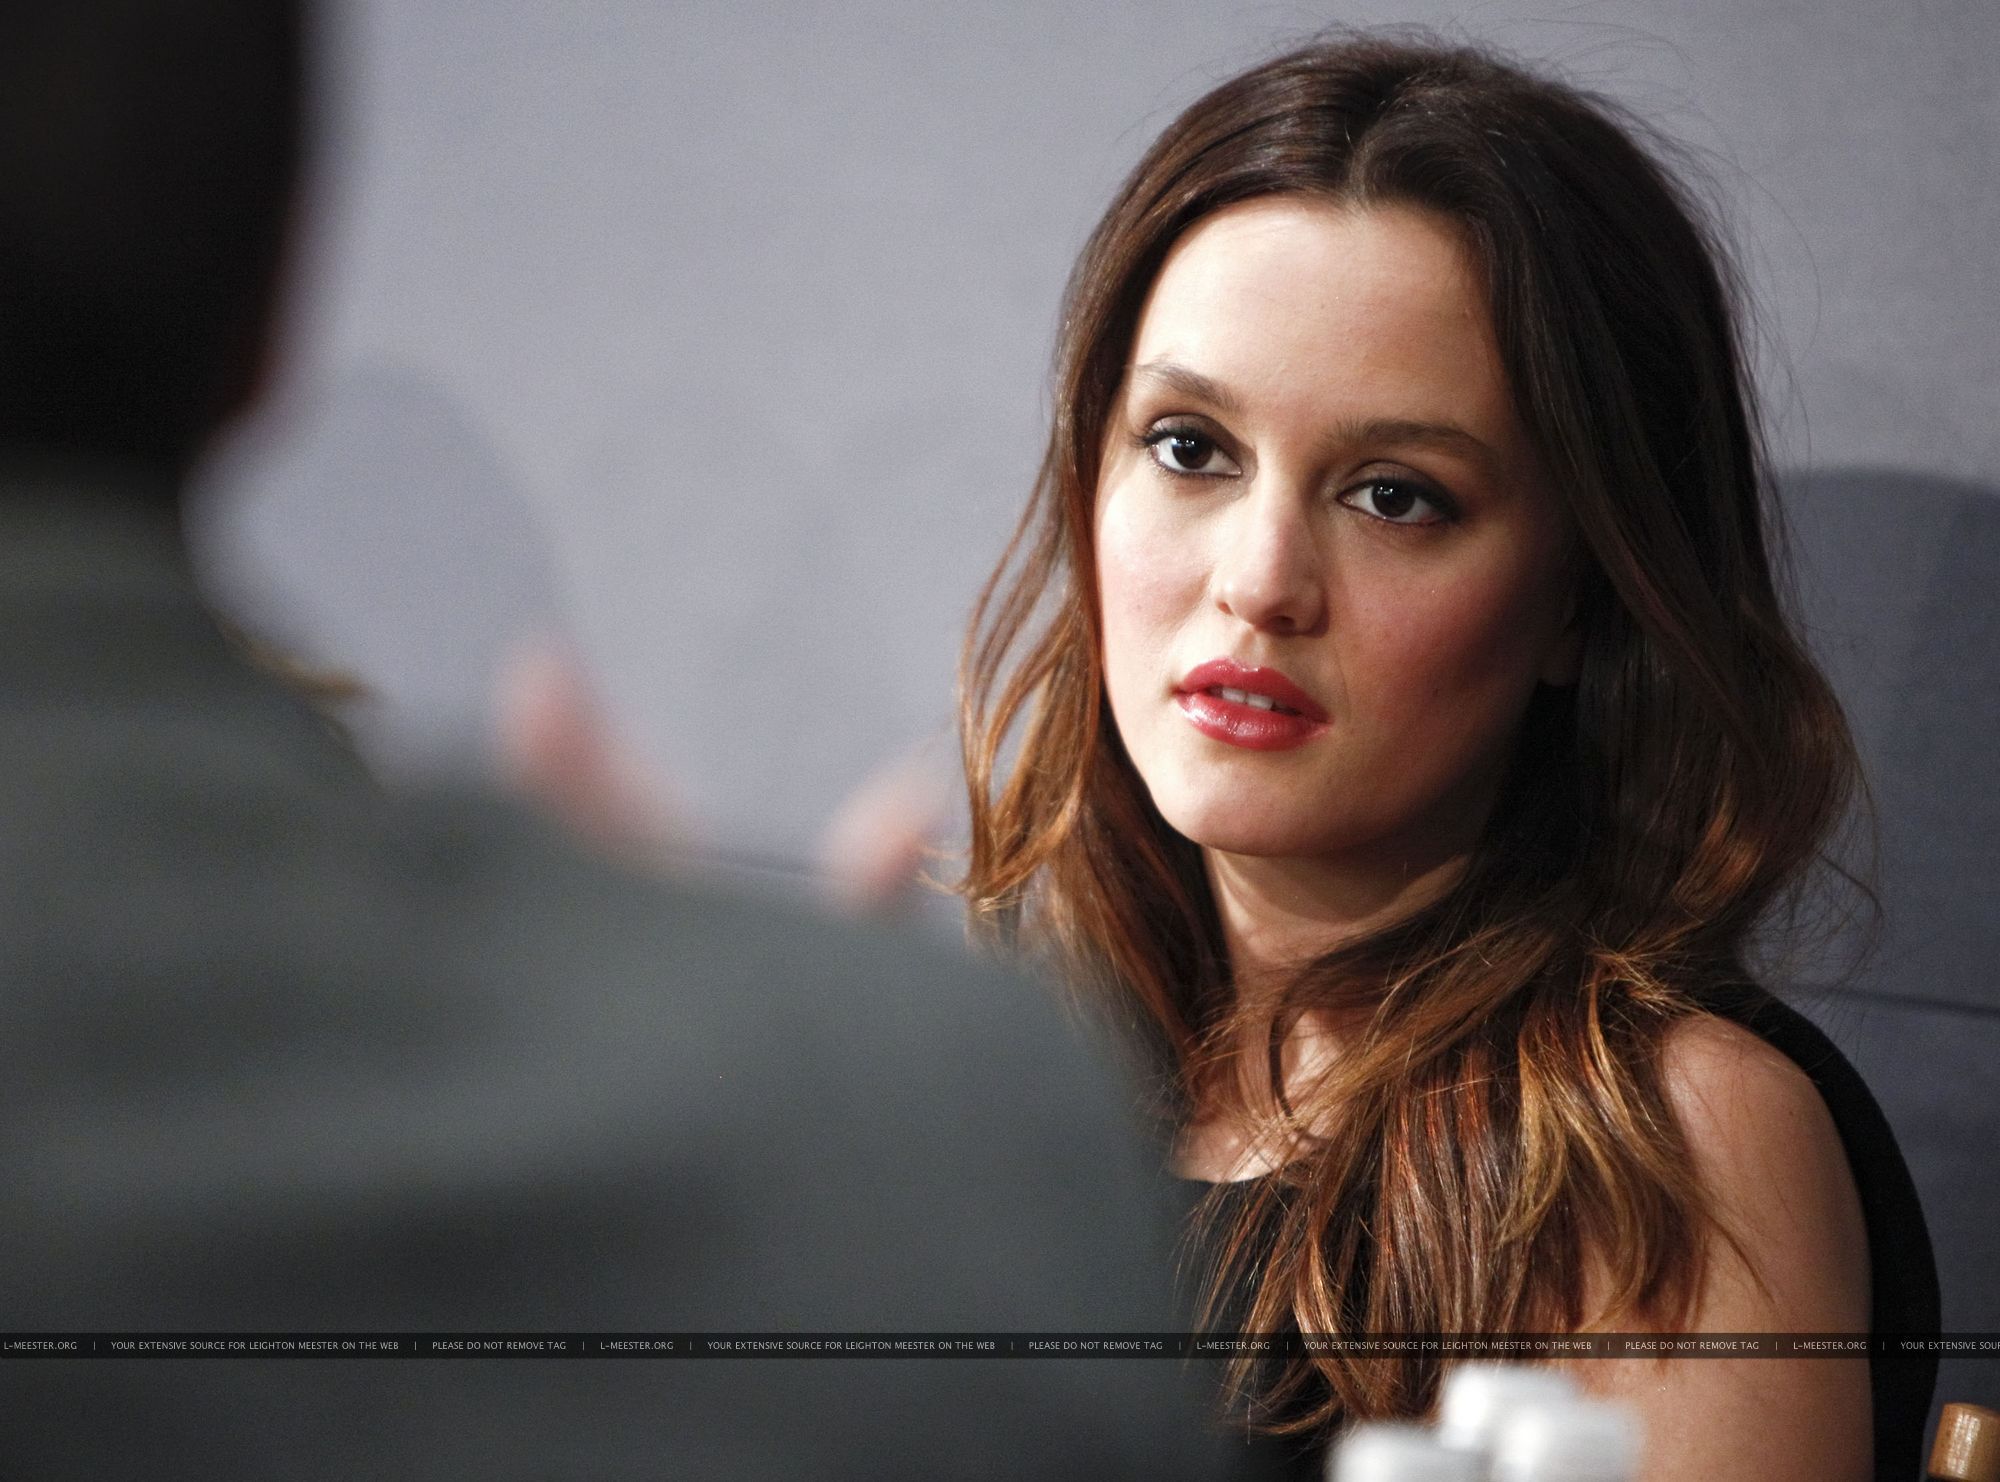 Leighton Meester Images on Fanpop.